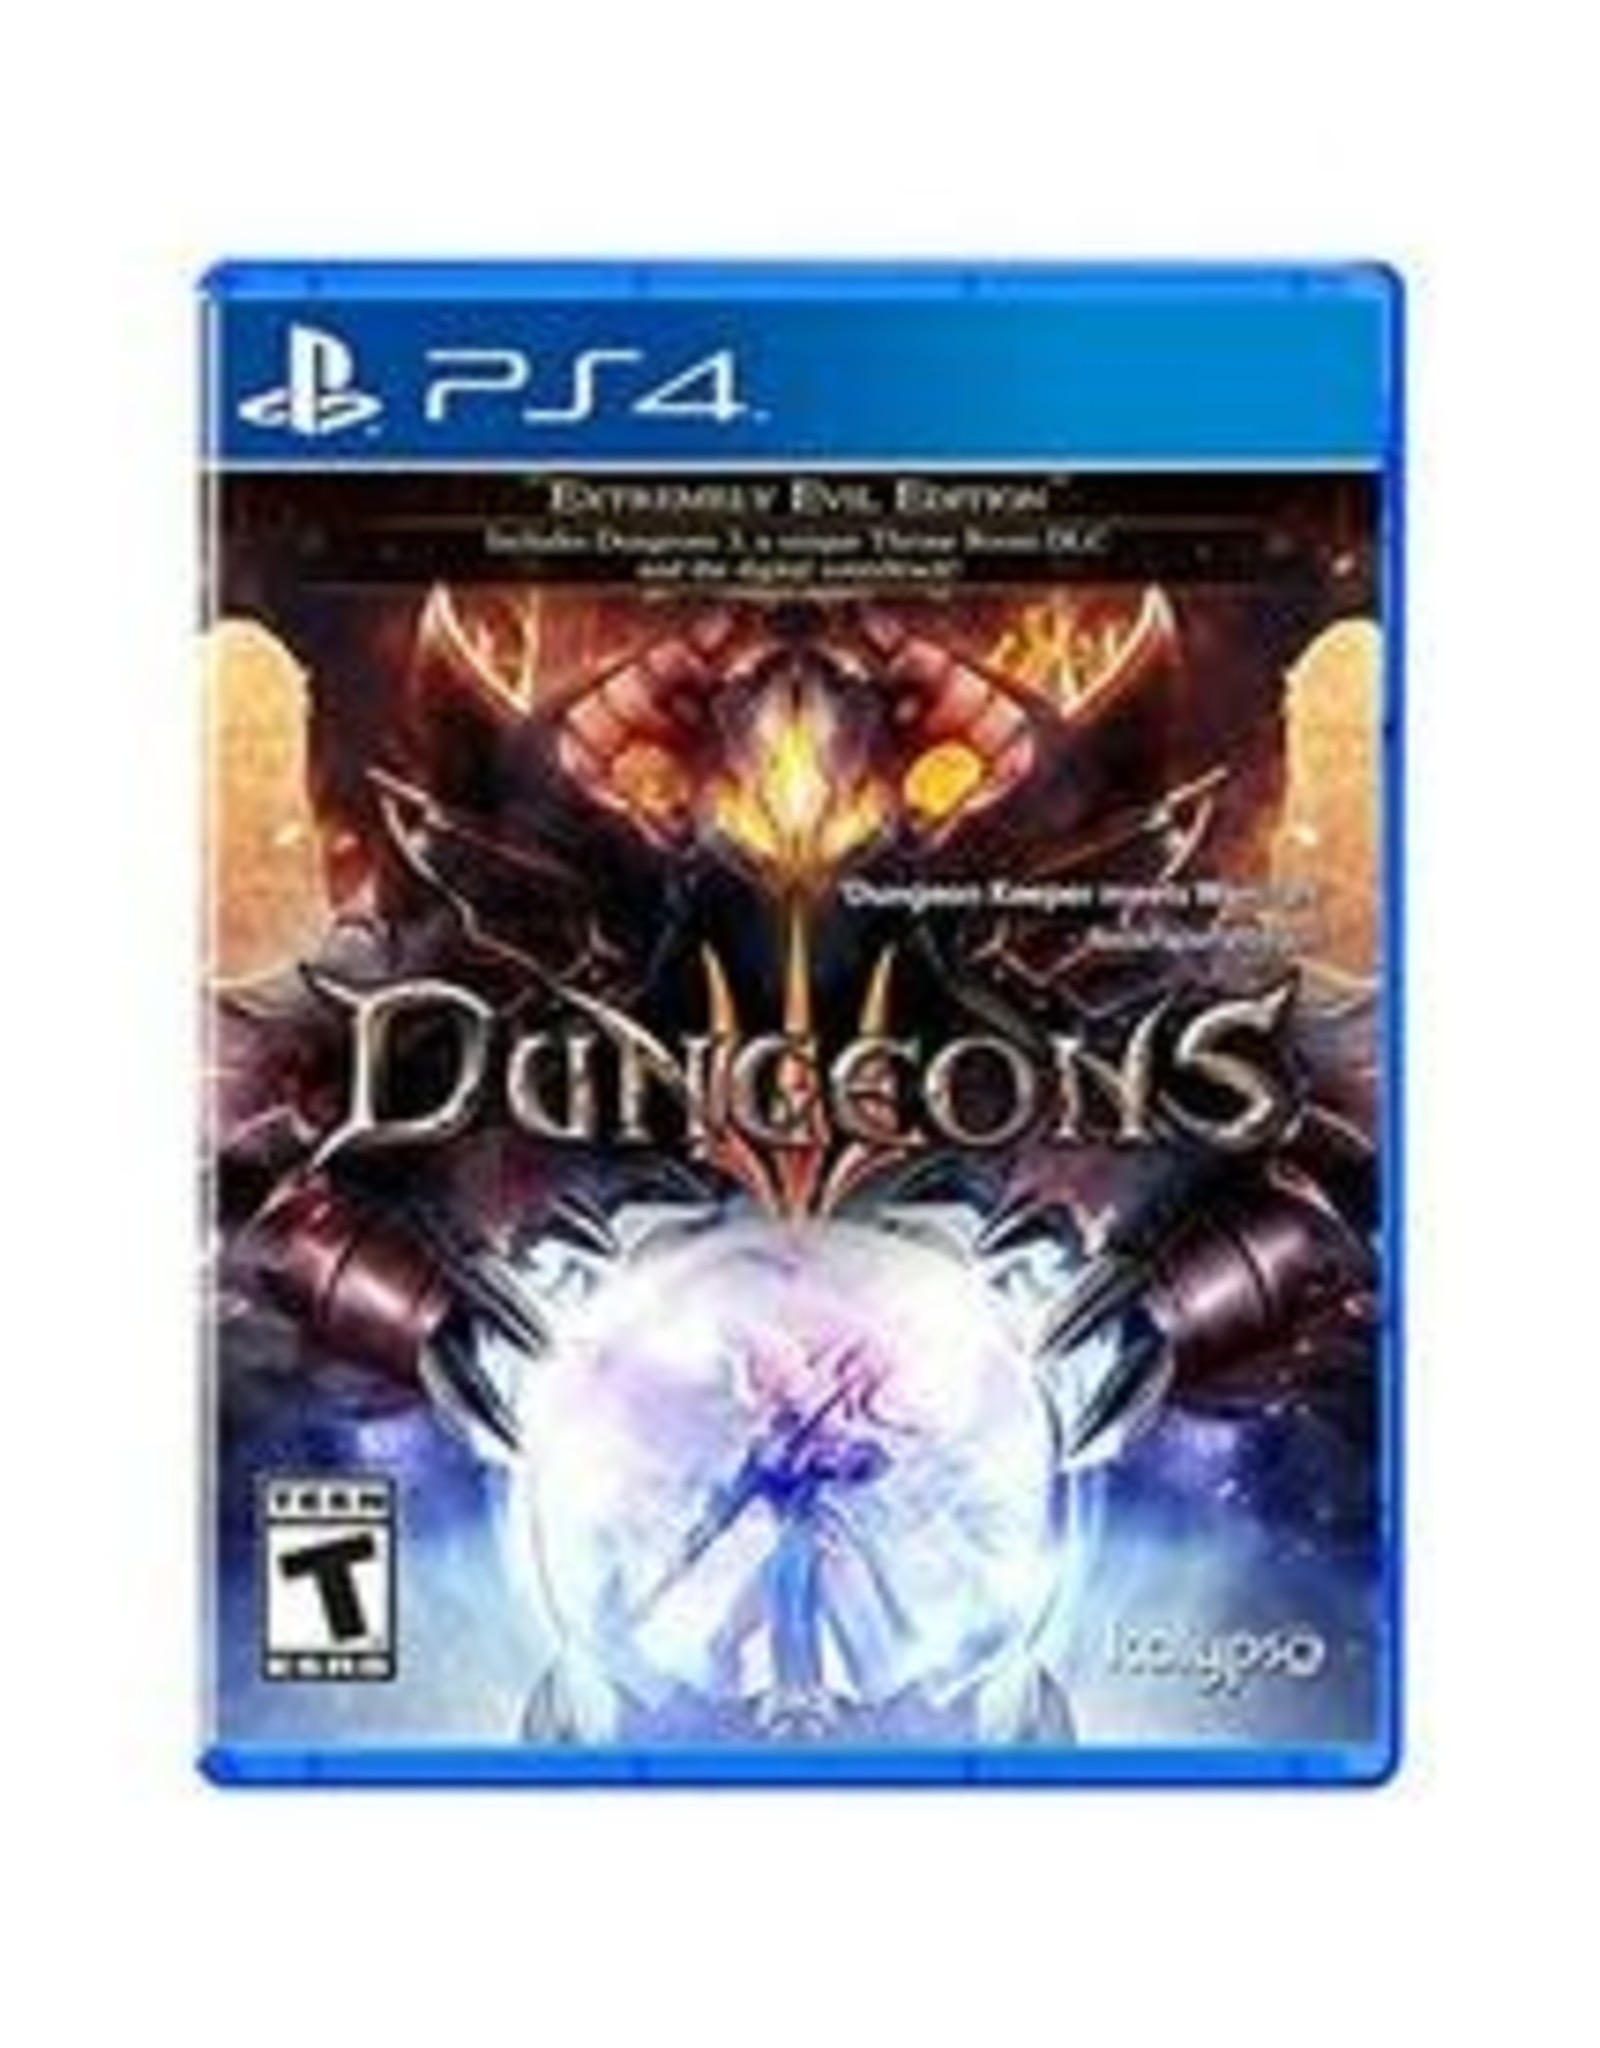 Playstation 4 Dungeons III Extremely Evil Edition (CiB, No DLC)